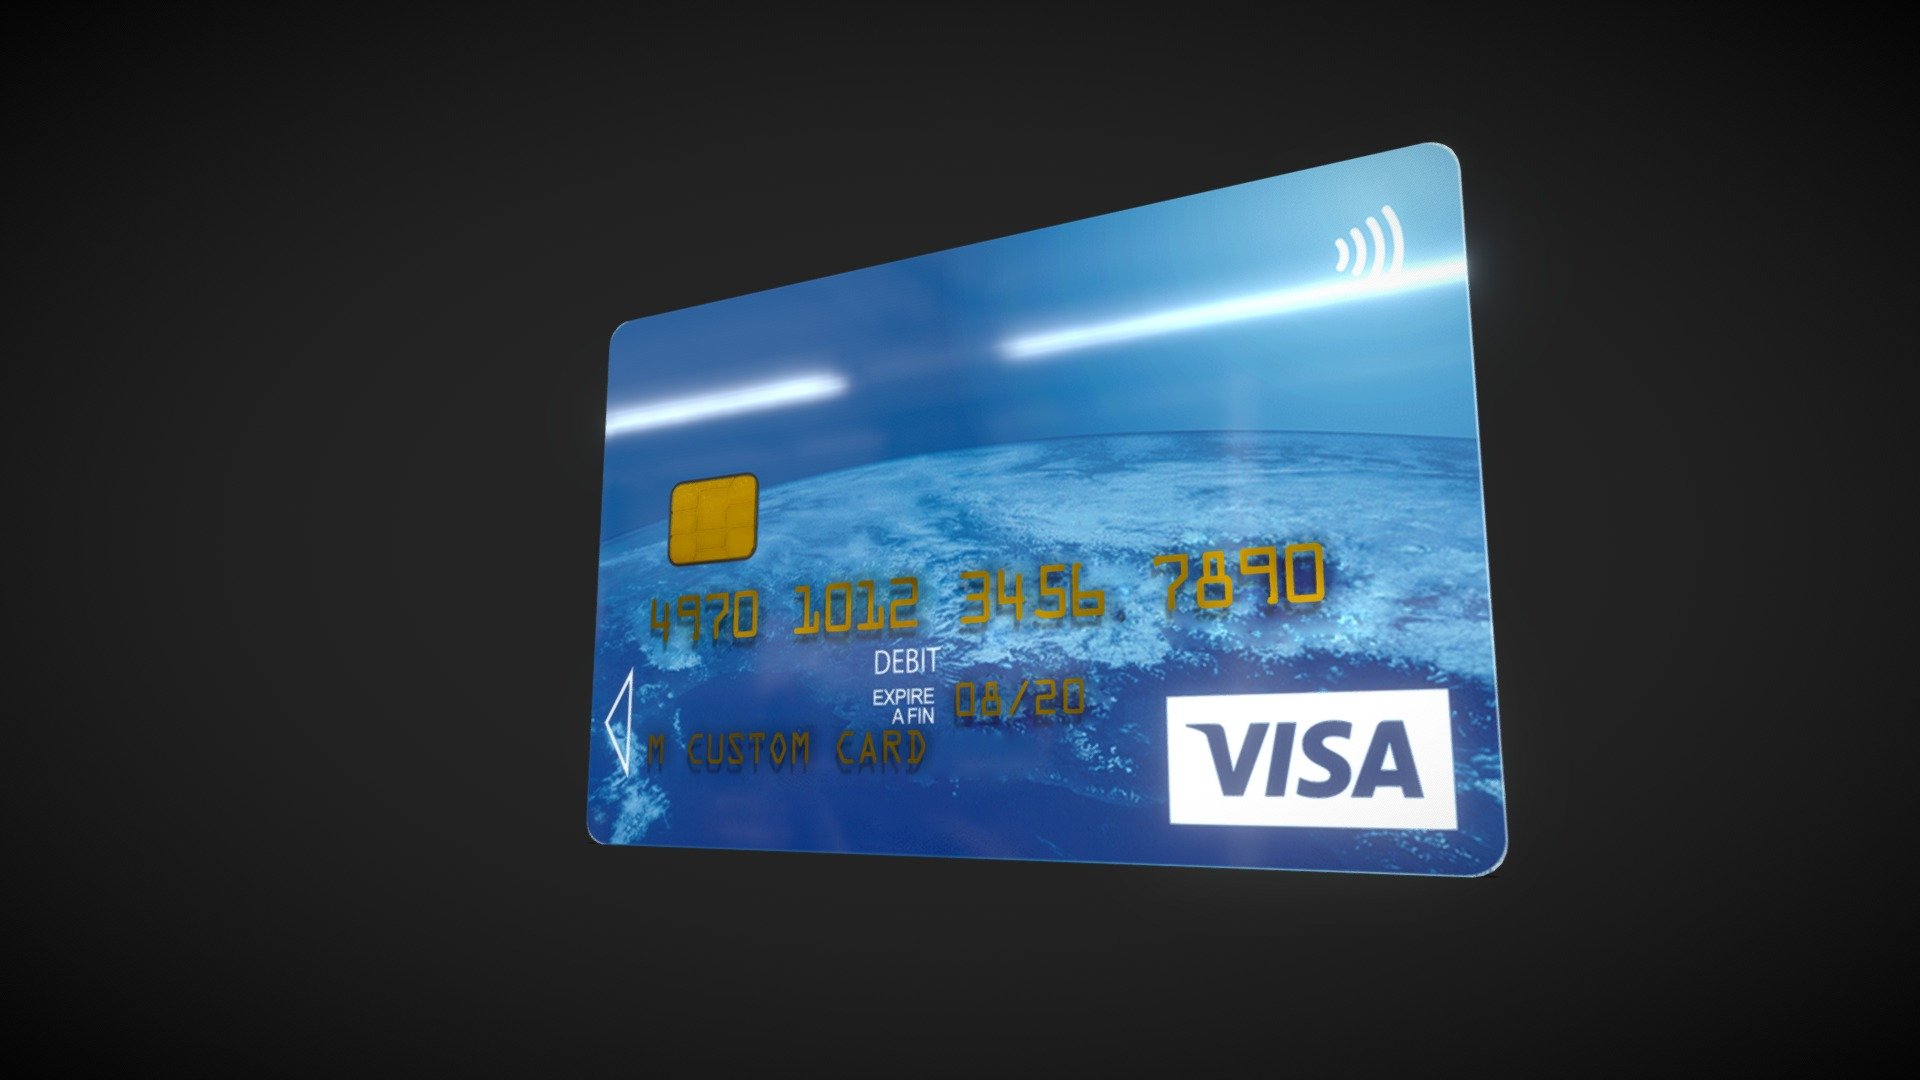 Fully Customisable Debit Card made from scratch on blender, 
the text is made with a font and solidifier trough a modifier in the blend file so you can edit it aswell as the numbers and texture.
It is low poly and optimised with pbr materials.
Even if it doesnt show in sketchfab viewer the text is 3D in blender 3d model